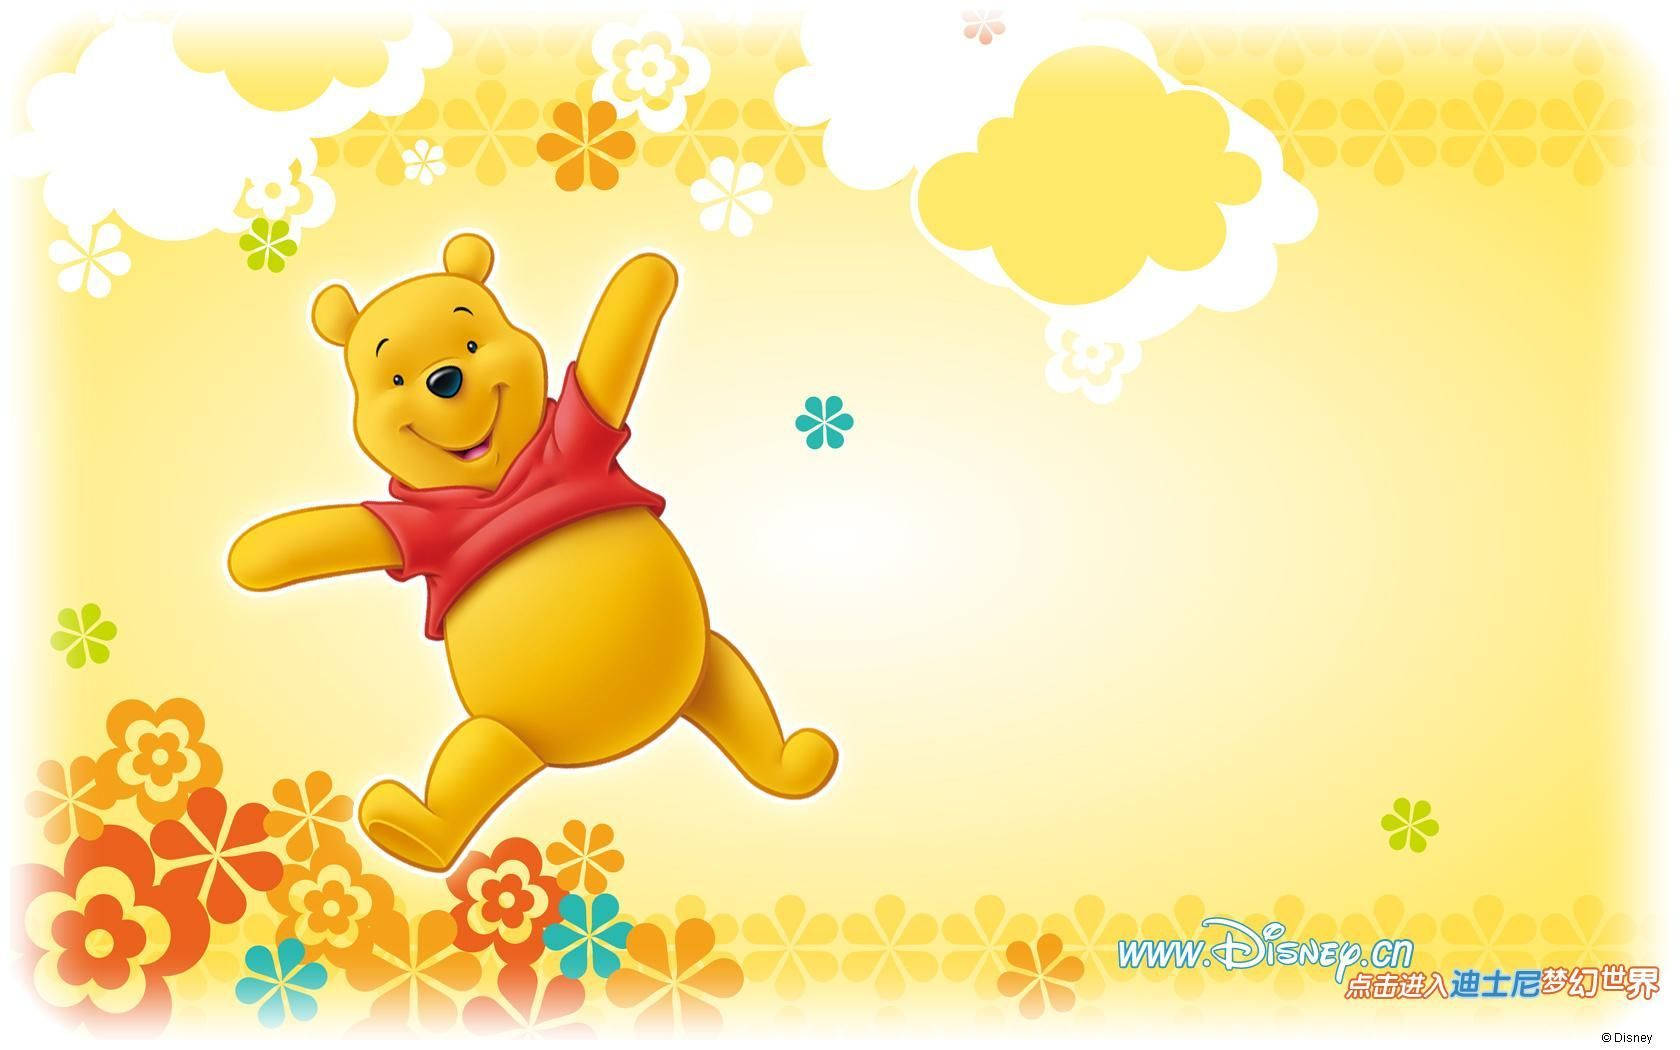 Celebrate with everyone’s favorite bear, Winnie The Pooh! Wallpaper